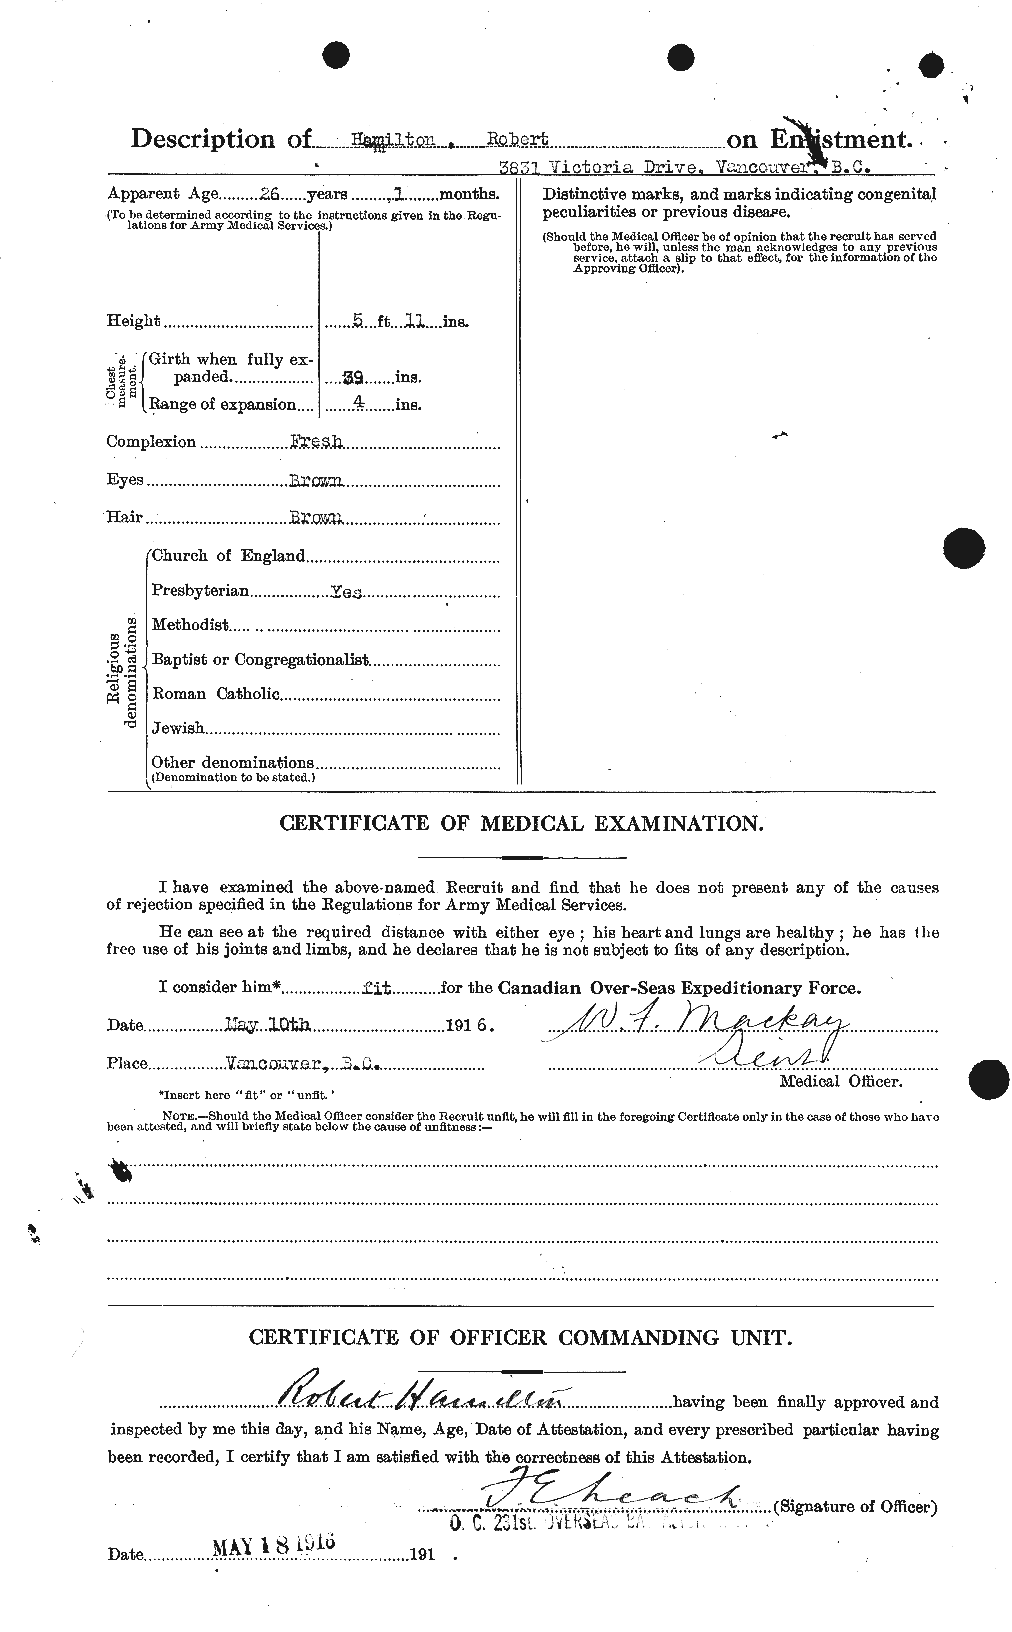 Personnel Records of the First World War - CEF 373234b